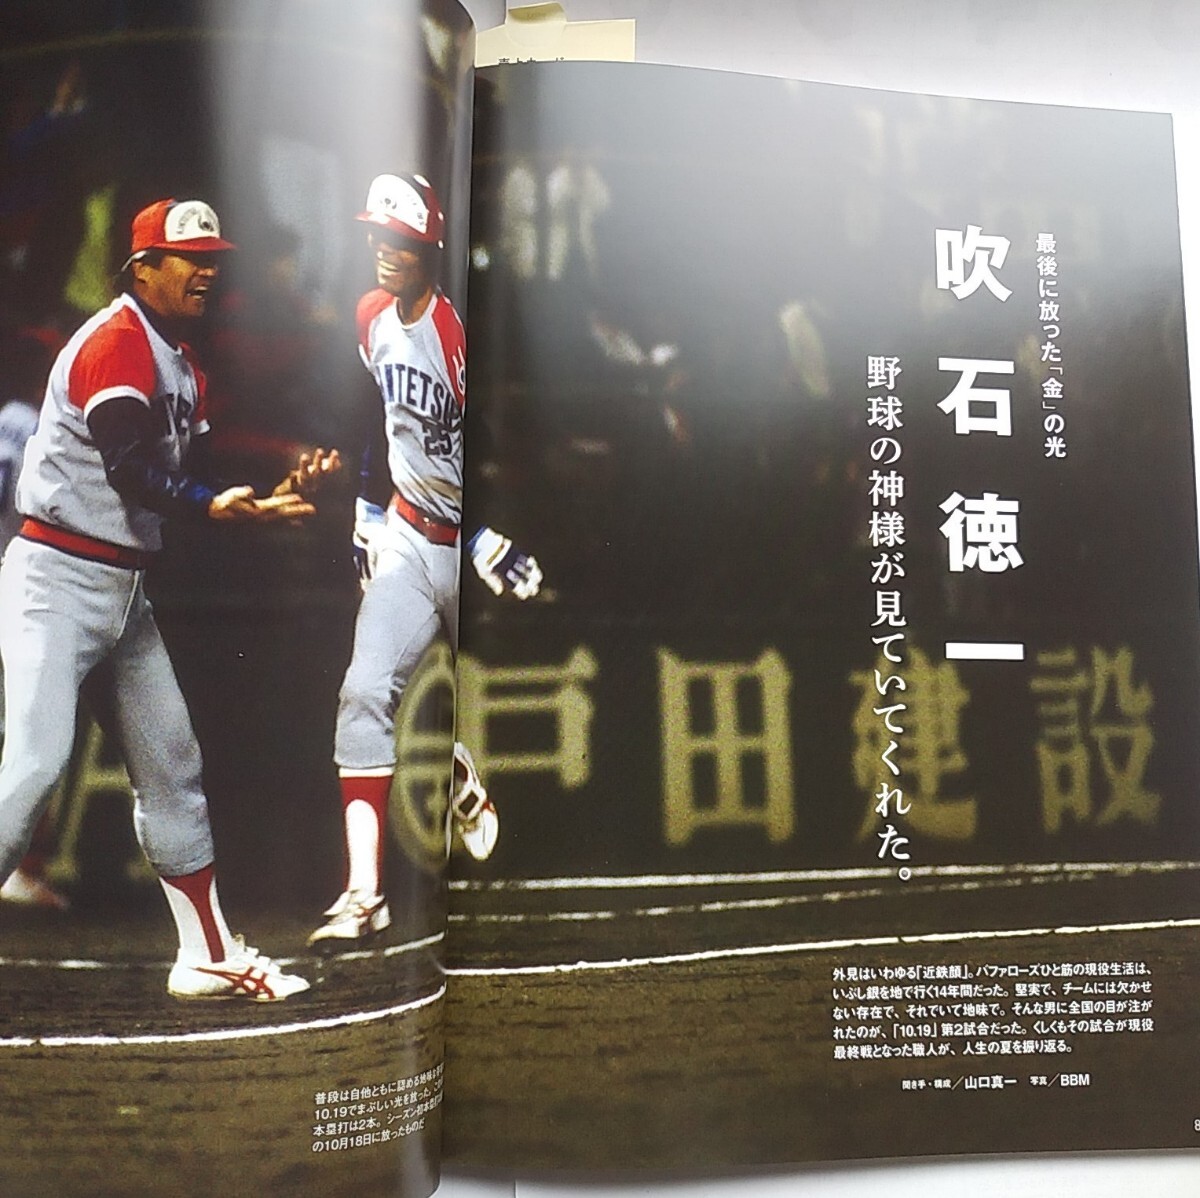 [ Me ... Pacific League close iron Buffaloes 1988 ~ lamp .. Paris -g. changing .1988 year .[10.19]. total power special collection ~ Baseball magazine 